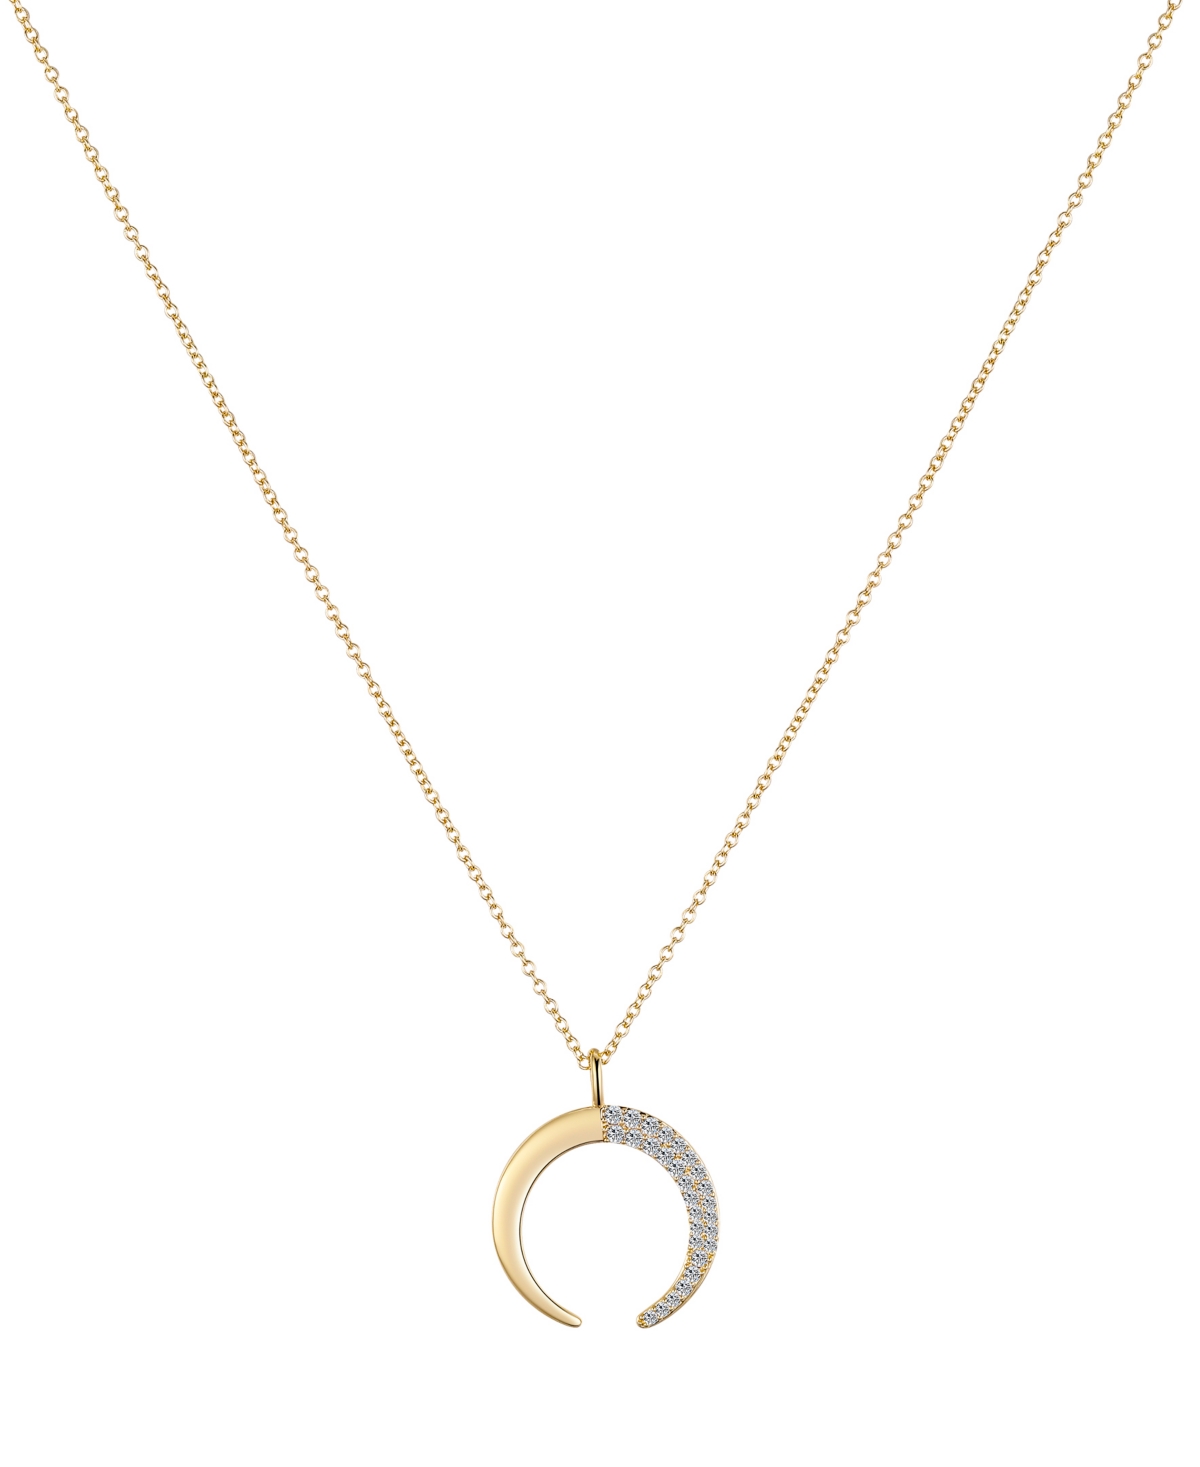 Unwritten 14k Gold Plated Cubic Zirconia Crescent Moon Pendant Necklace